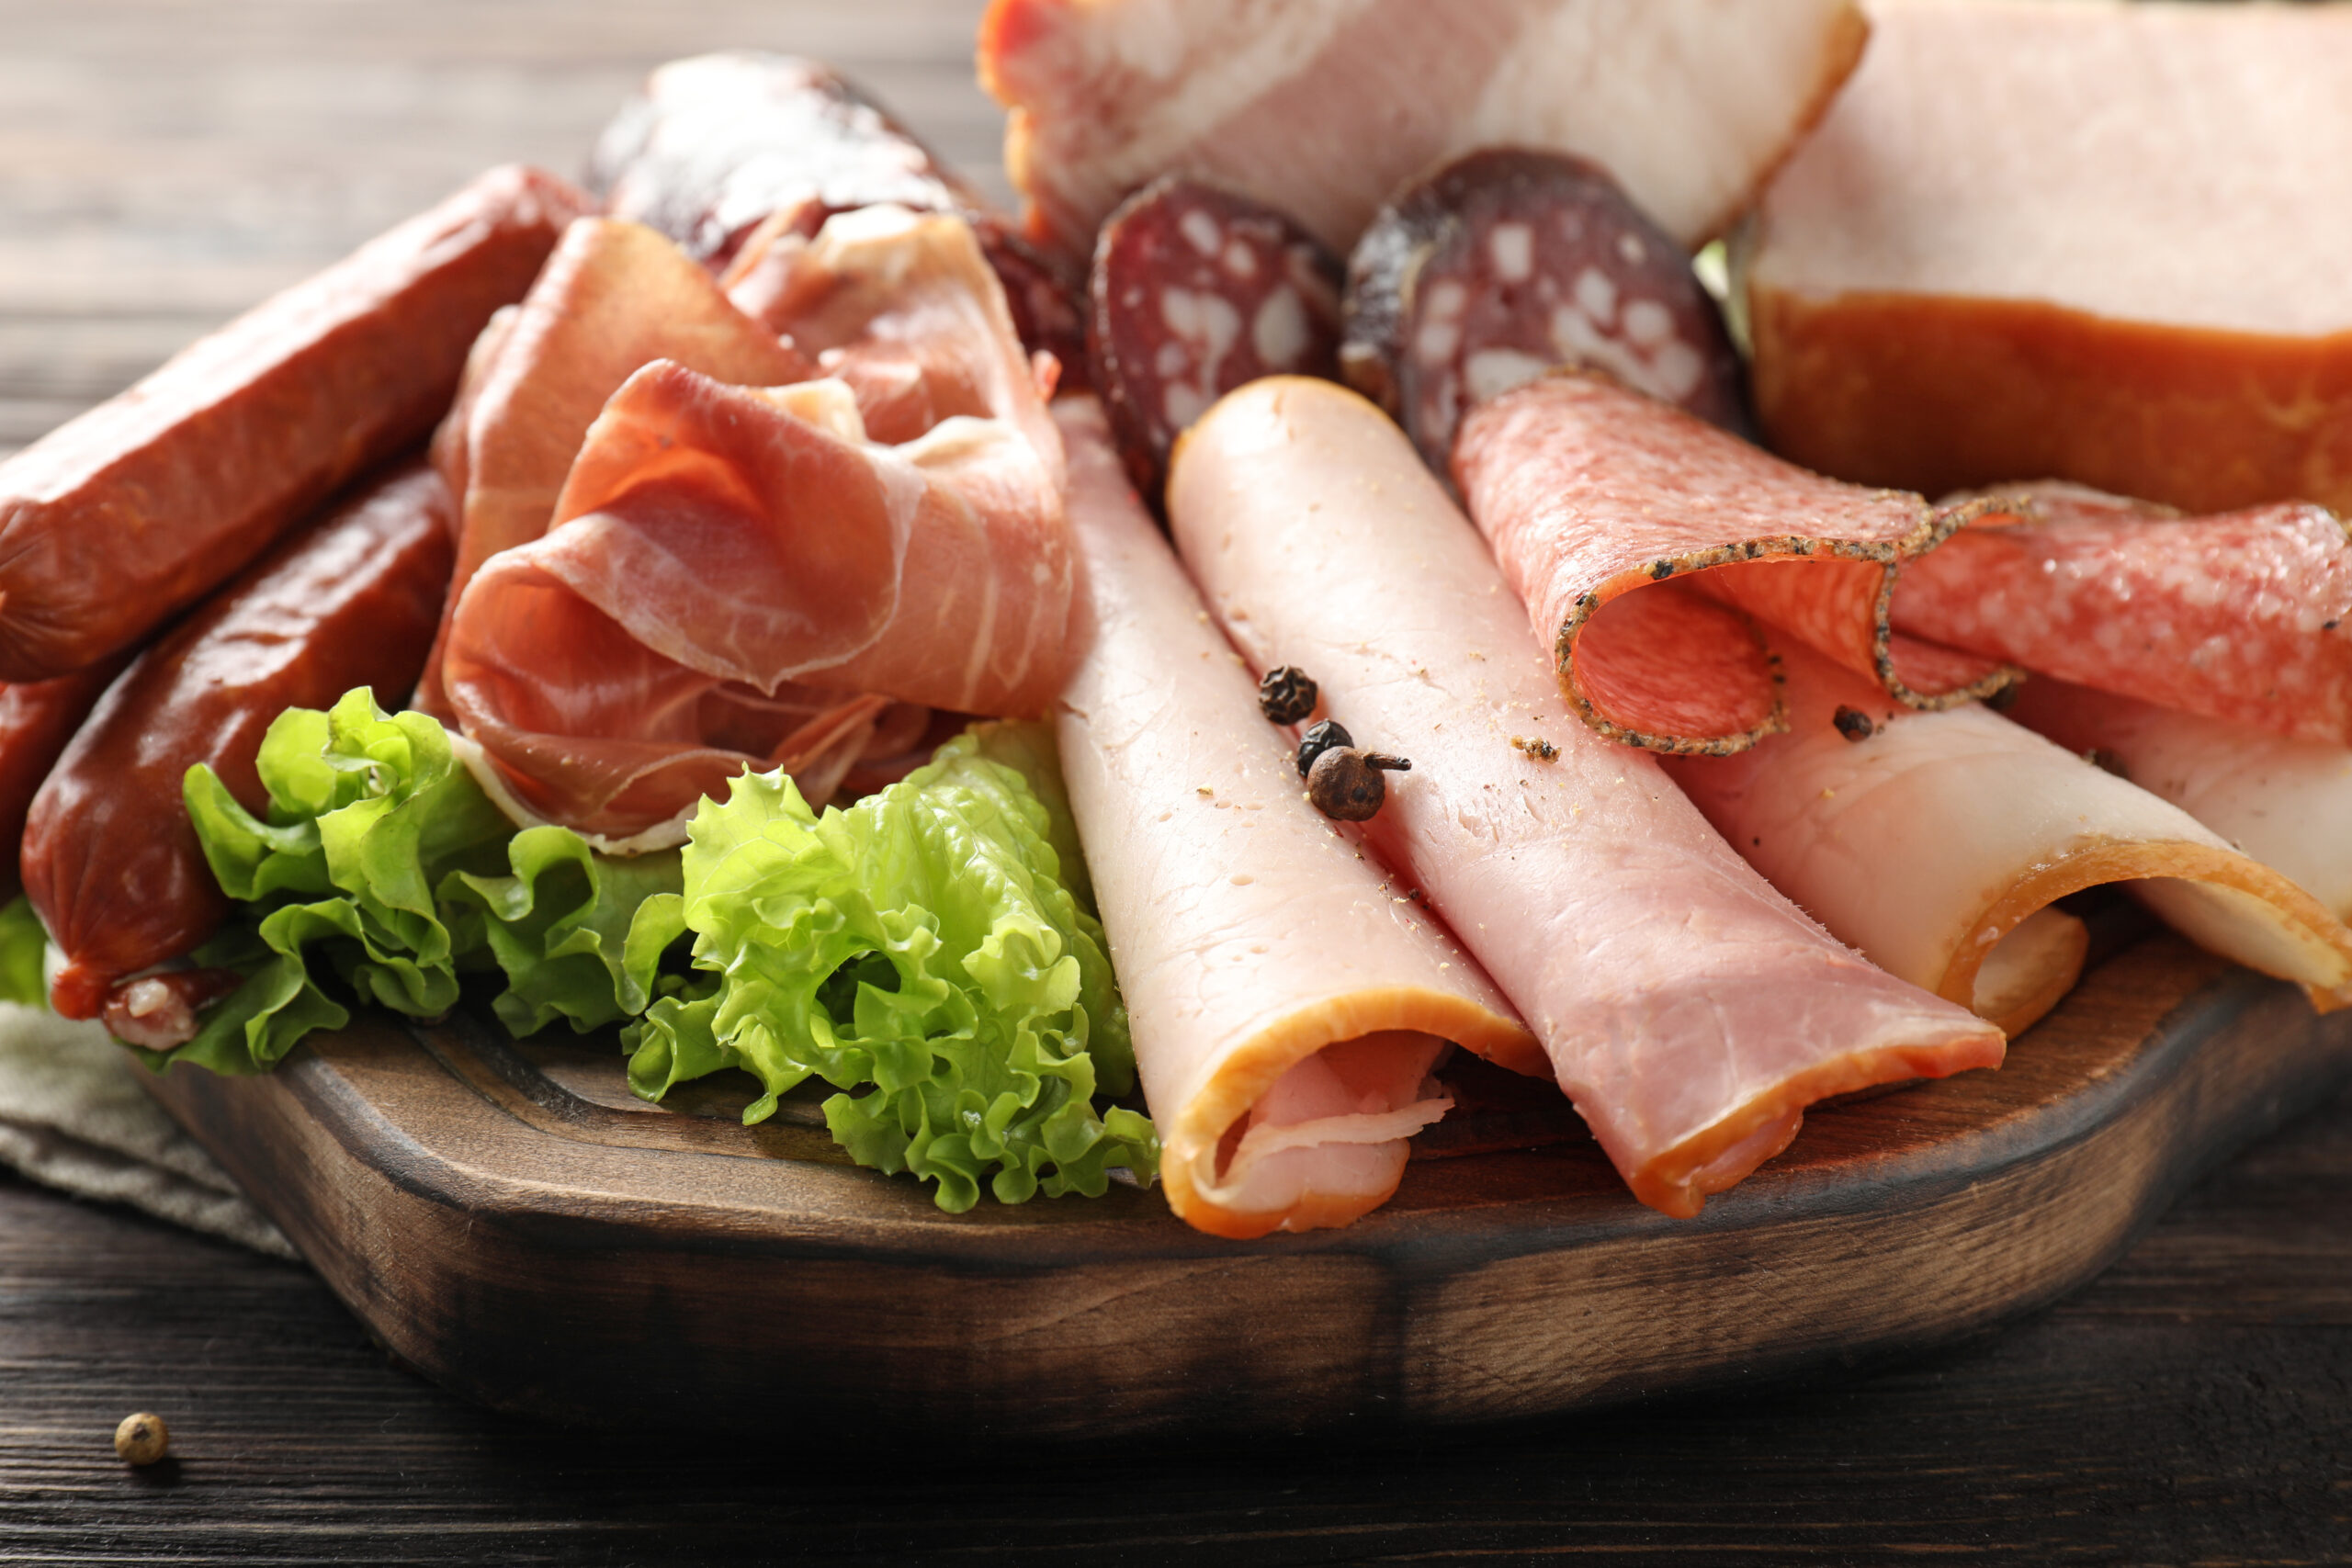 Wooden board with assortment of delicious deli meats on wooden board